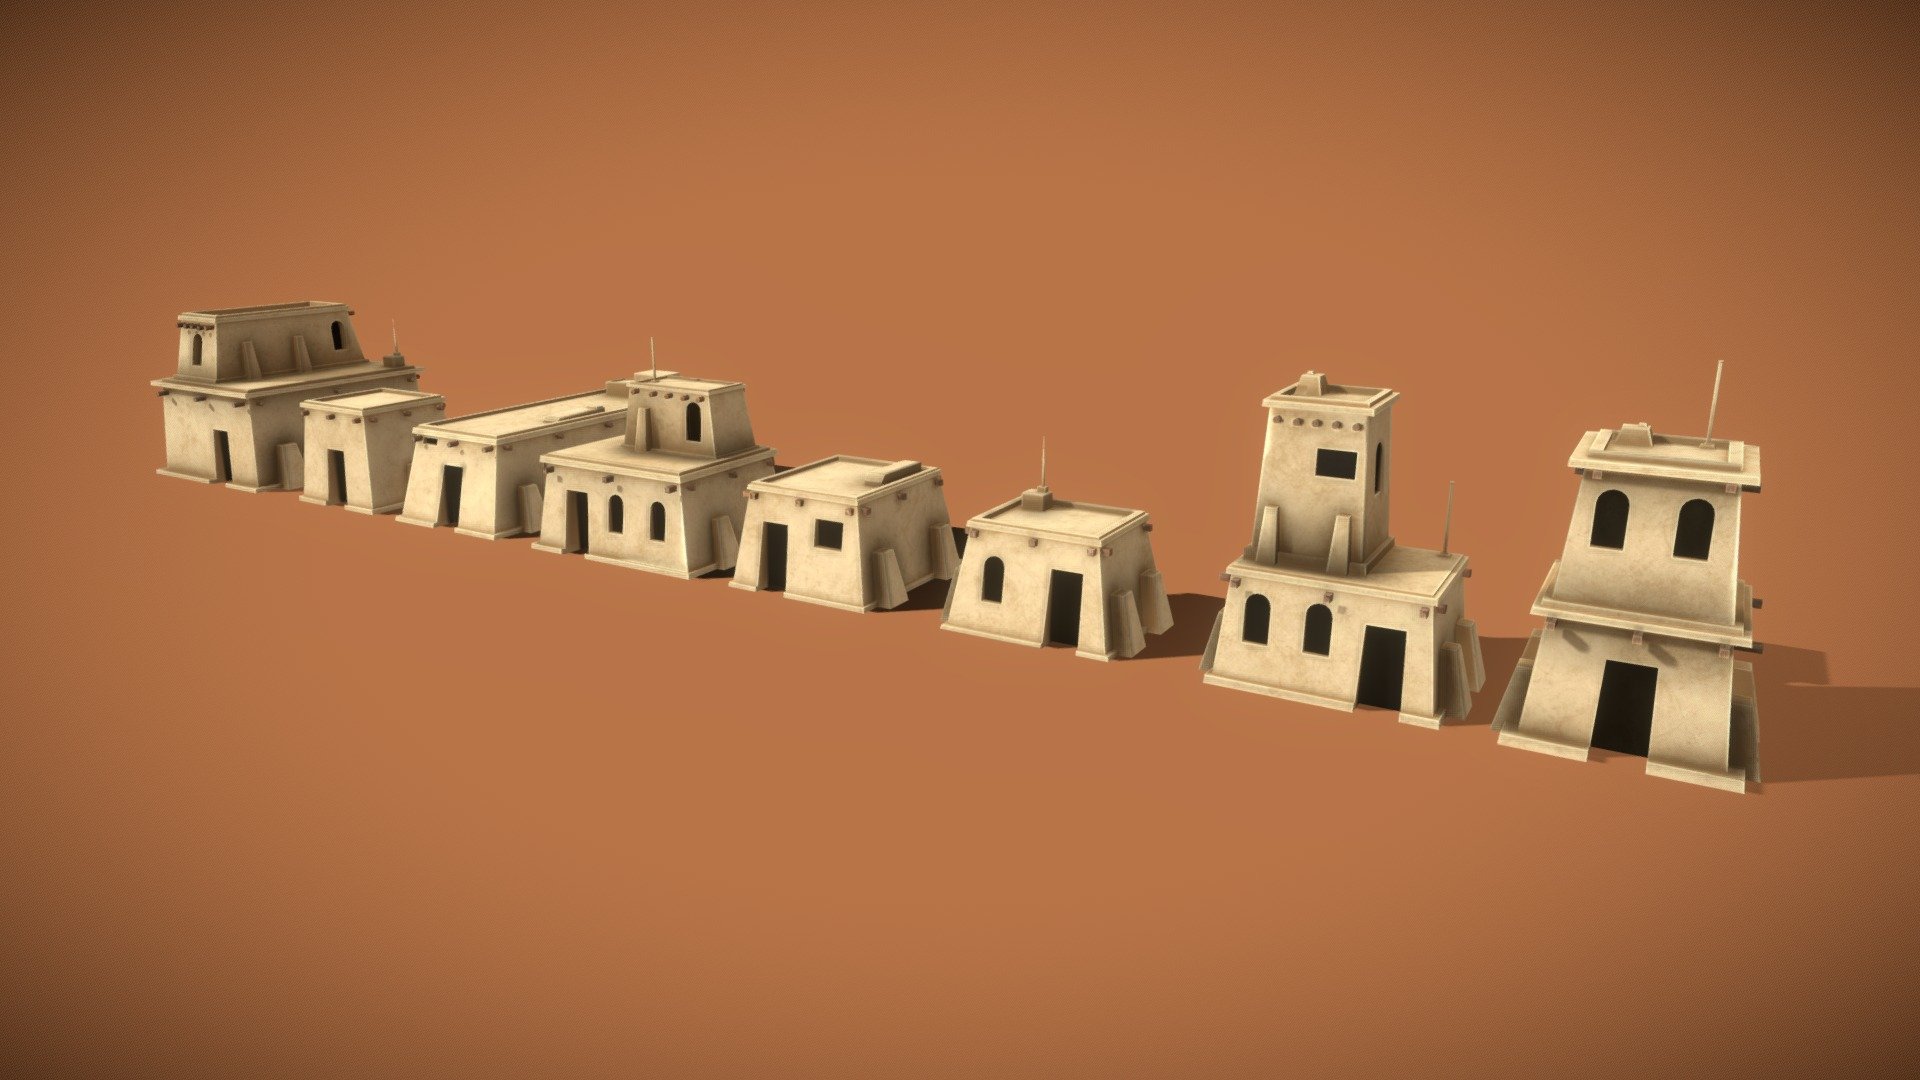 Unity Universal Render Pipeline 



FBX AND PNG FORMAT



Textures

.2K



8 Materials



Assets for free use

Dont forget to download the additional File - Desert Houses Pack - Buy Royalty Free 3D model by Zambur 3d model